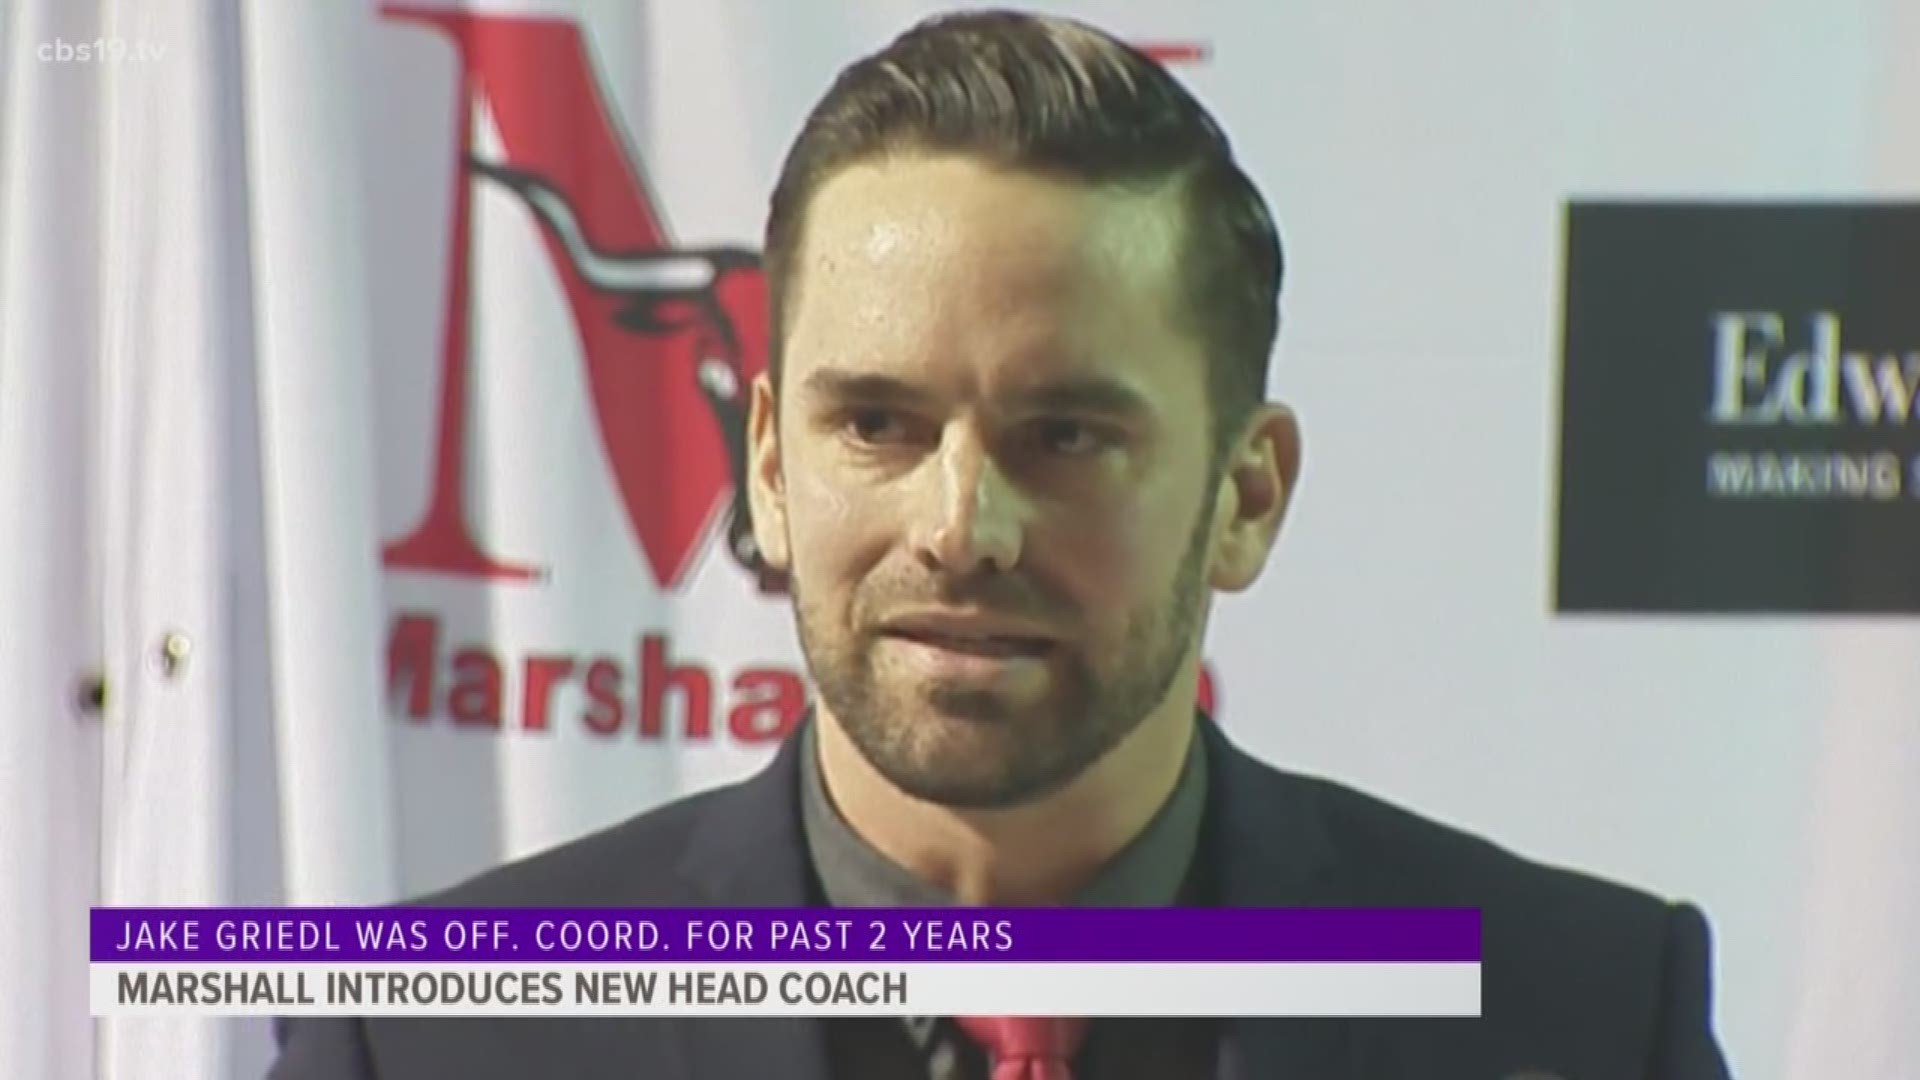 Marshall introduced Jake Griedl as their new head coach on Wednesday afternoon.